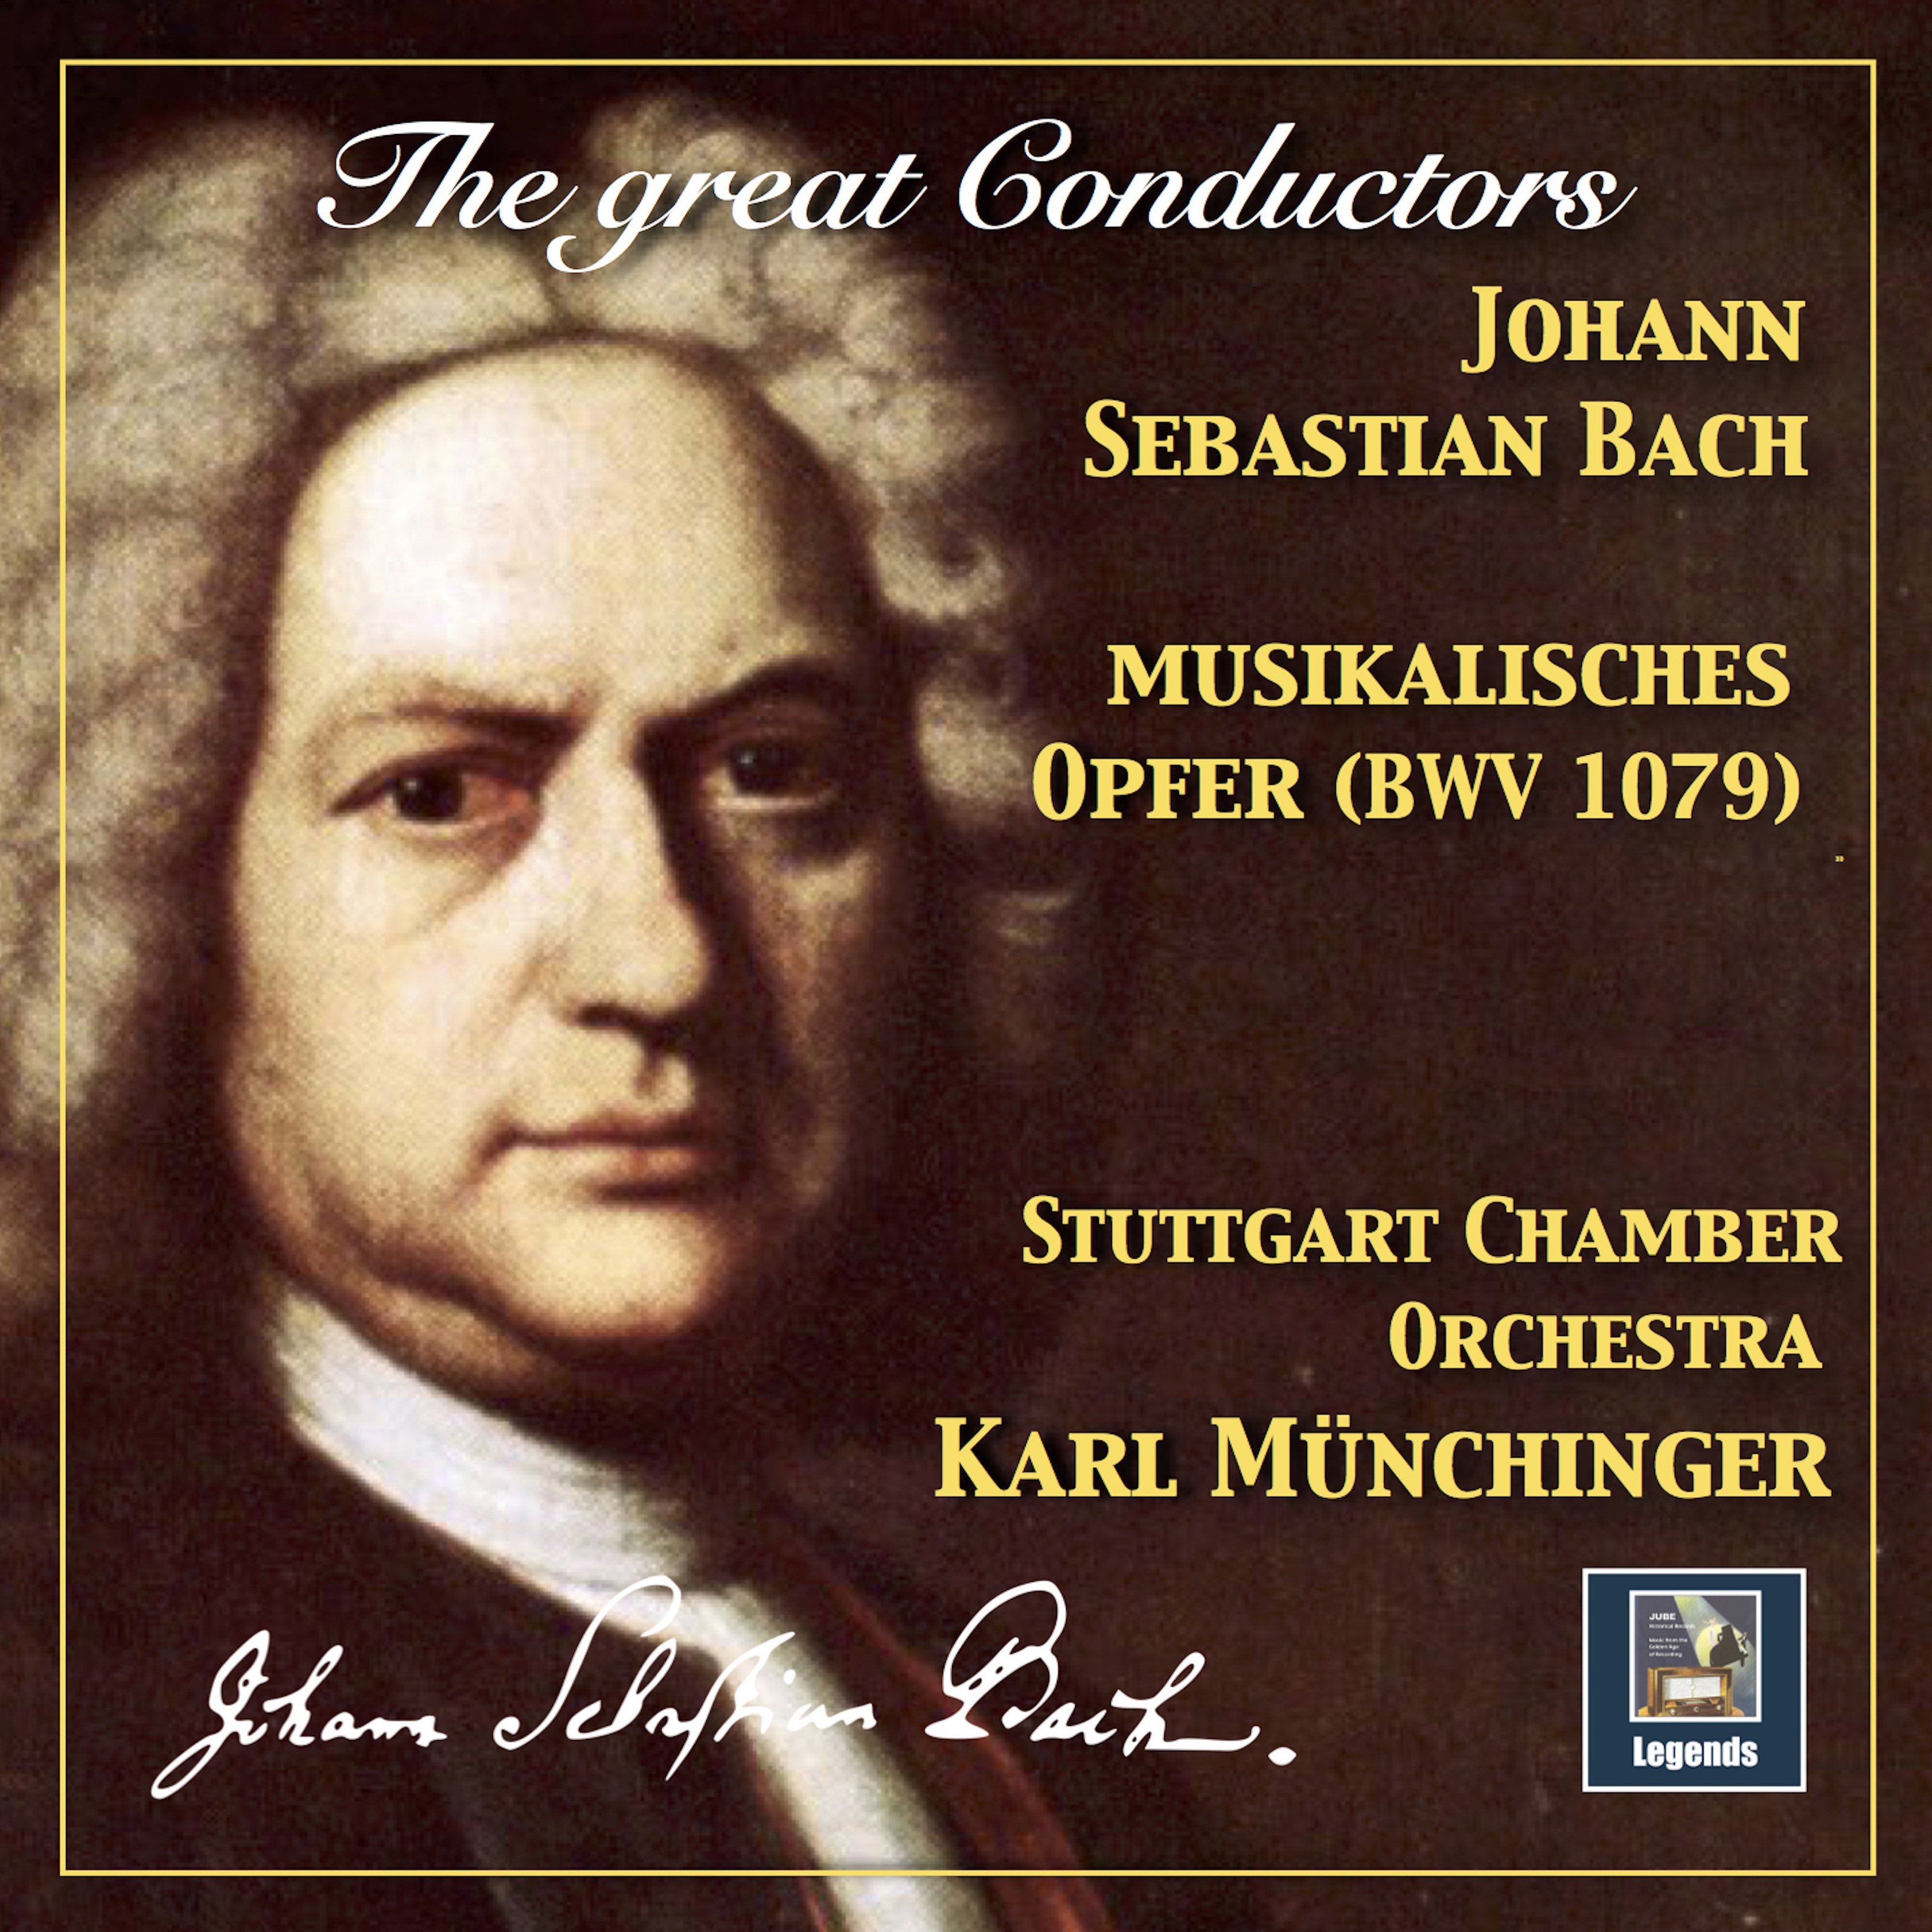 Musikalisches Opfer, BWV 1079 Arr. K. Mü nchinger for Chamber Orchestra: Canon perpetuus